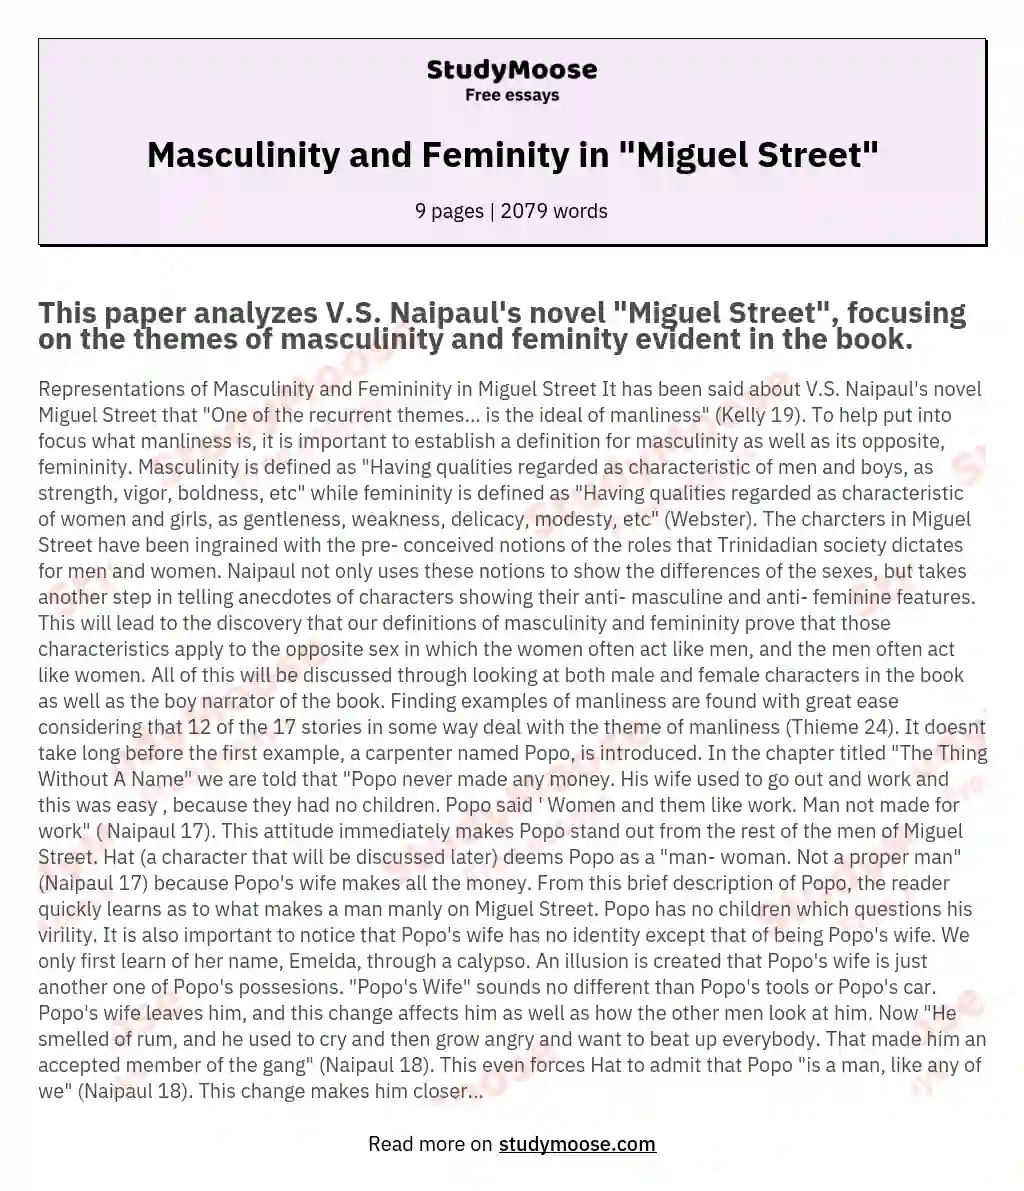 Masculinity and Feminity in "Miguel Street" essay